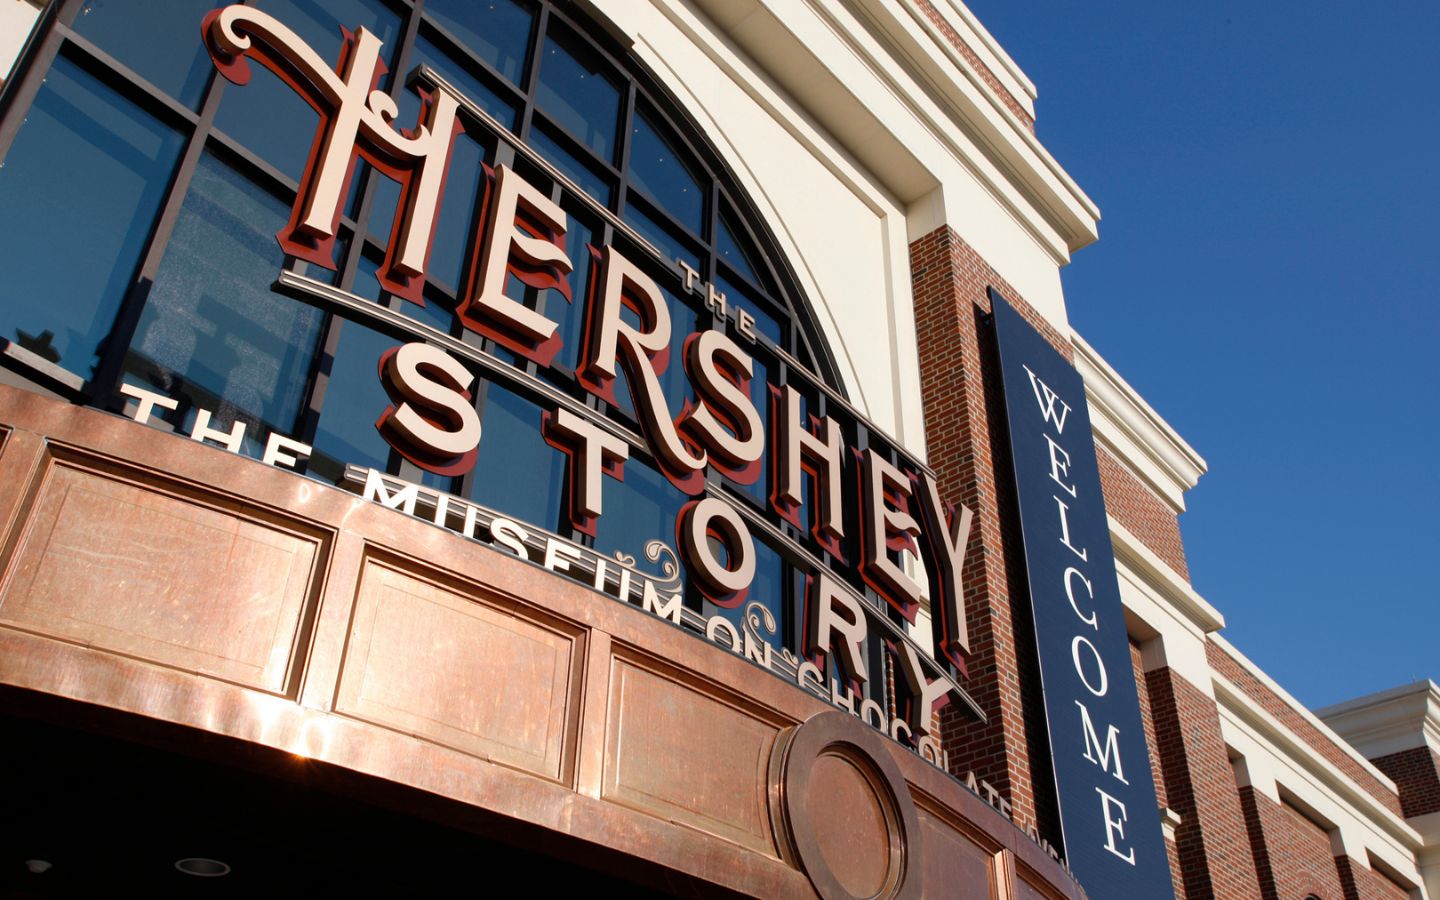 view of building's front entrance sign that says "the hershey story the museum on chocolate, welcome"